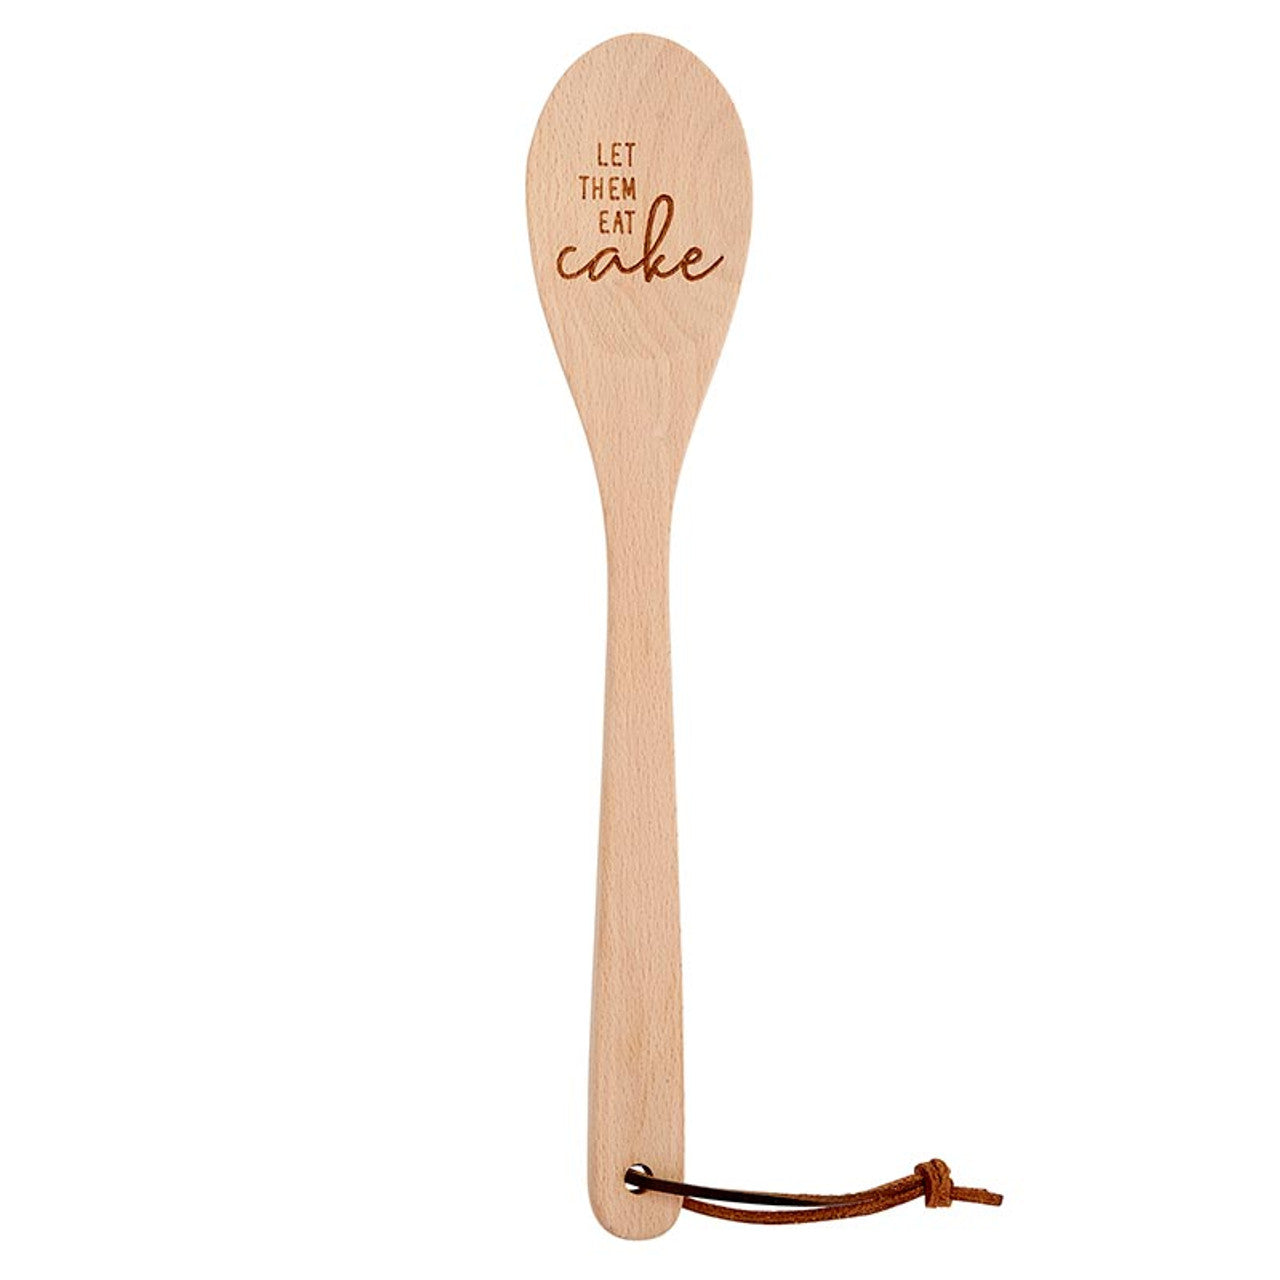 Let Them Eat Cake - Wooden Spoon